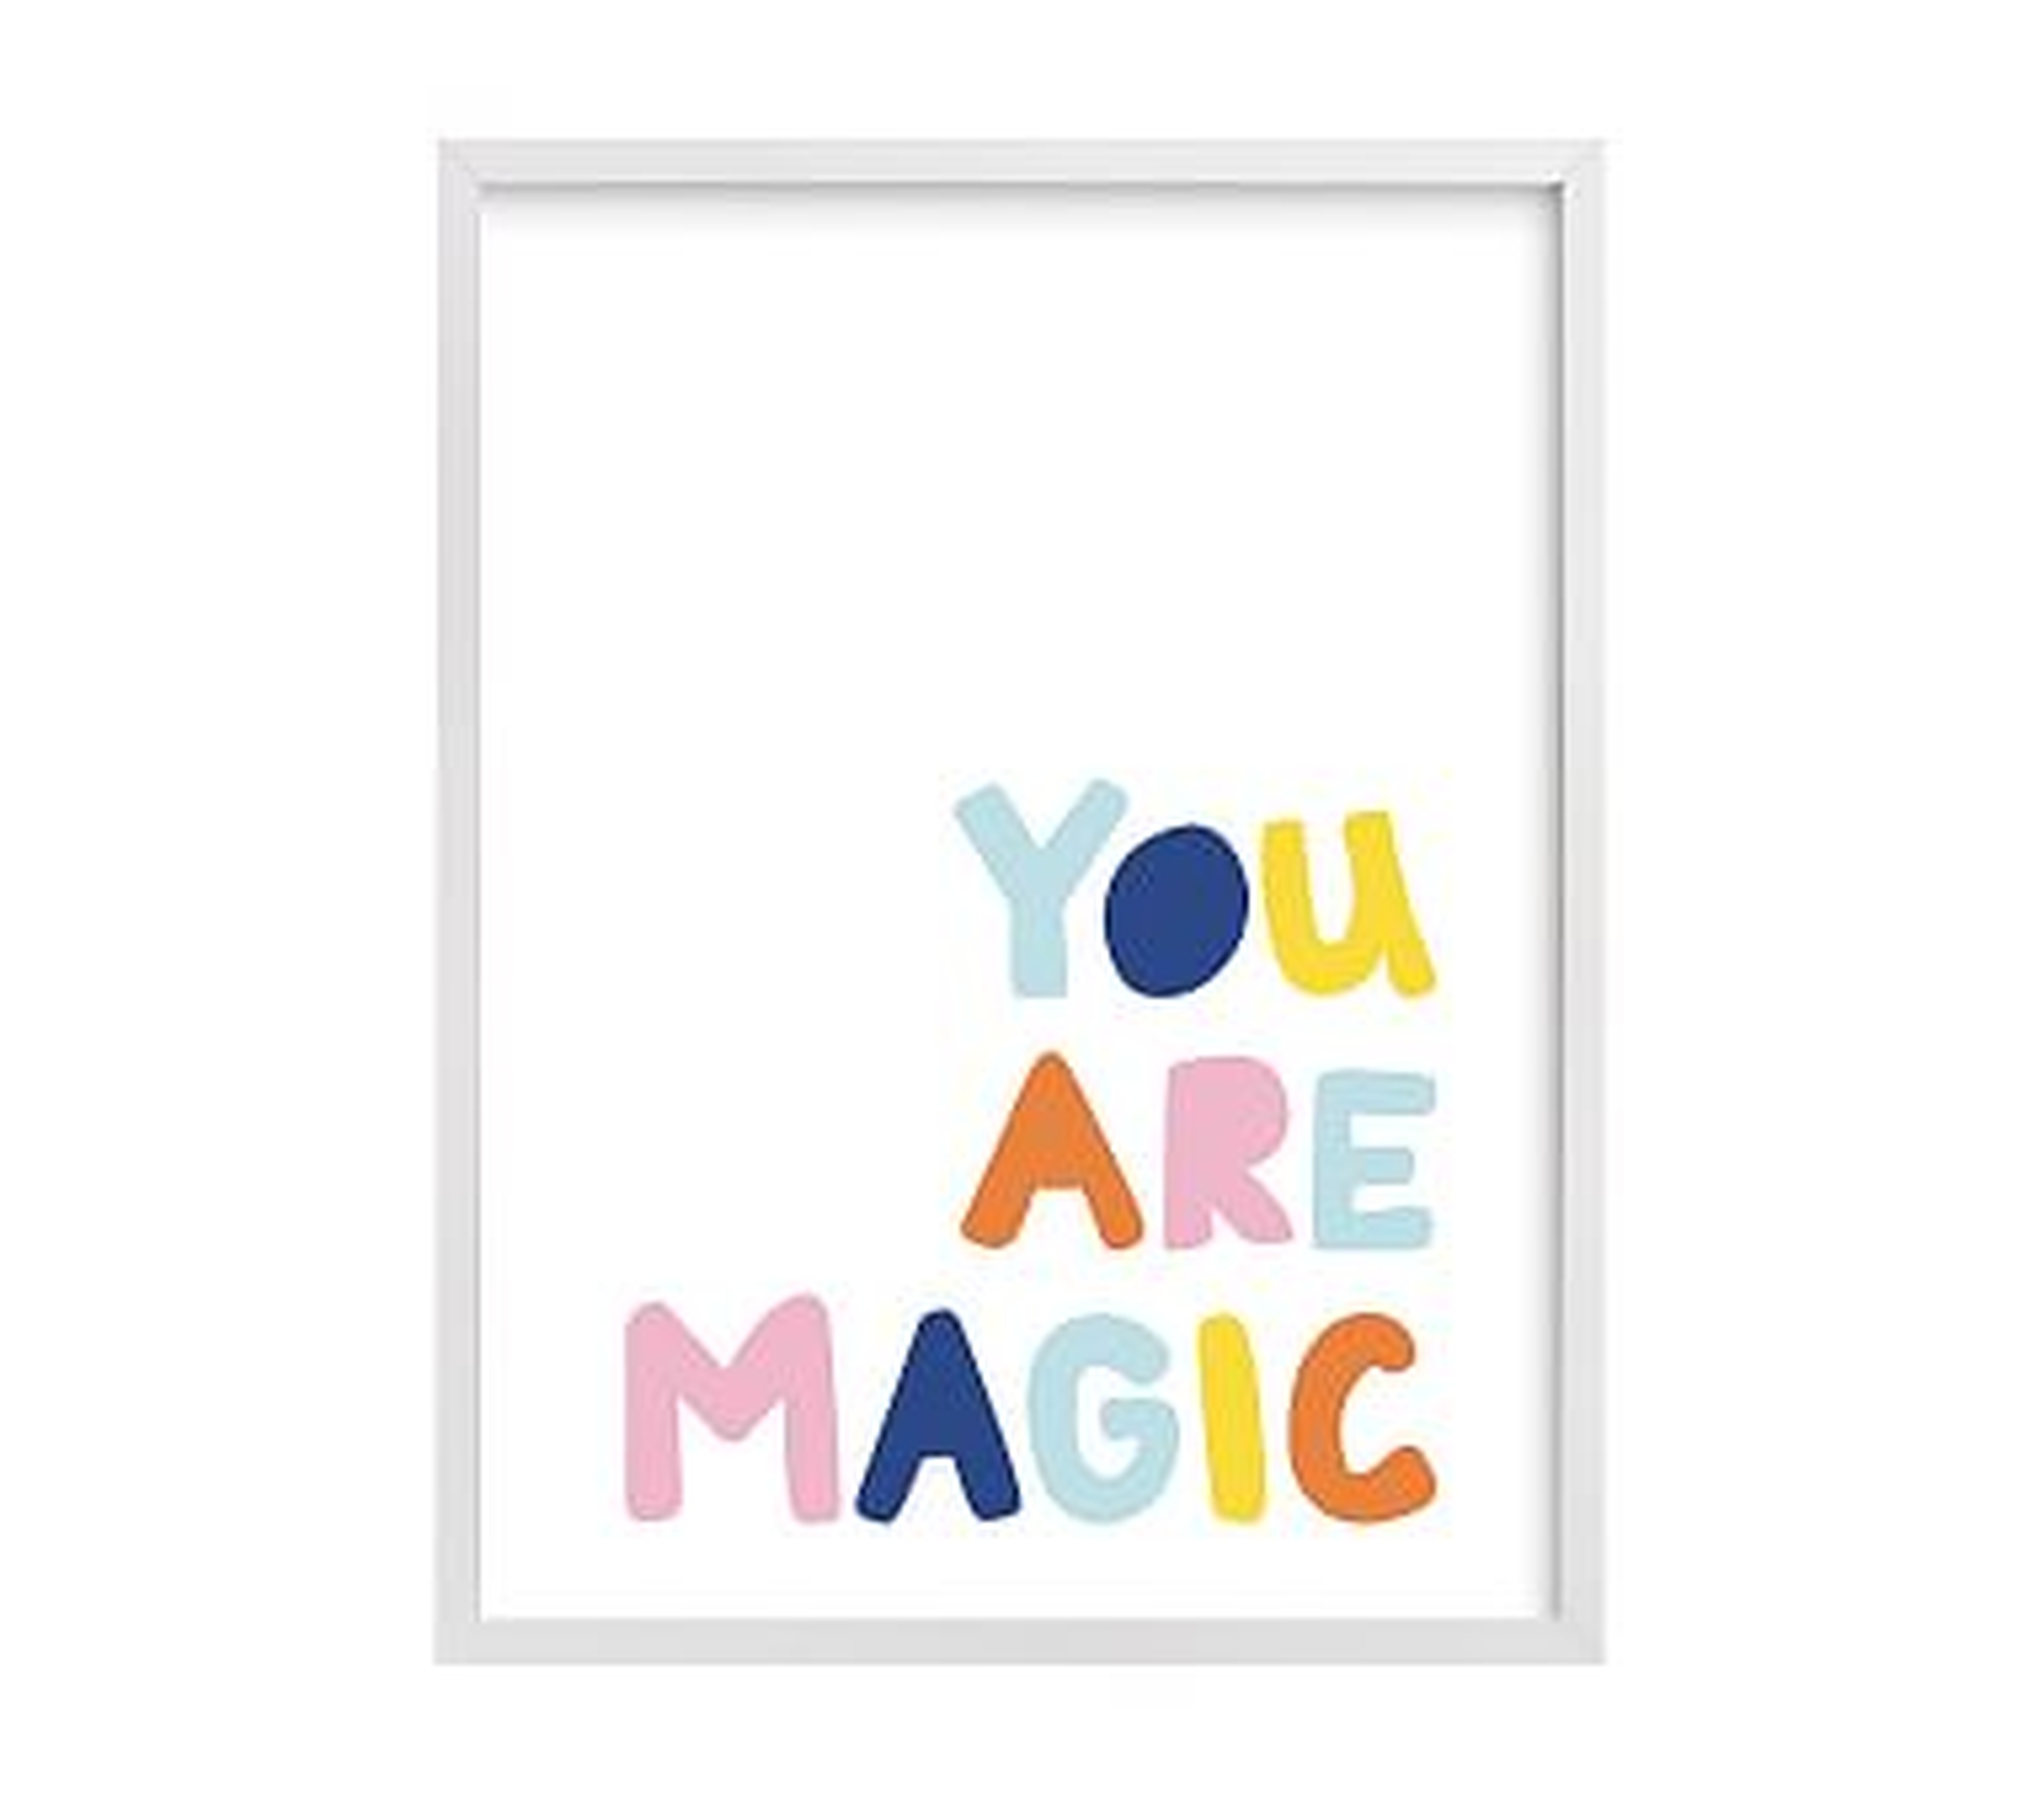 west elm x pbk You Are Magic Wall Art by Minted(R), White, 18x24 - Pottery Barn Kids